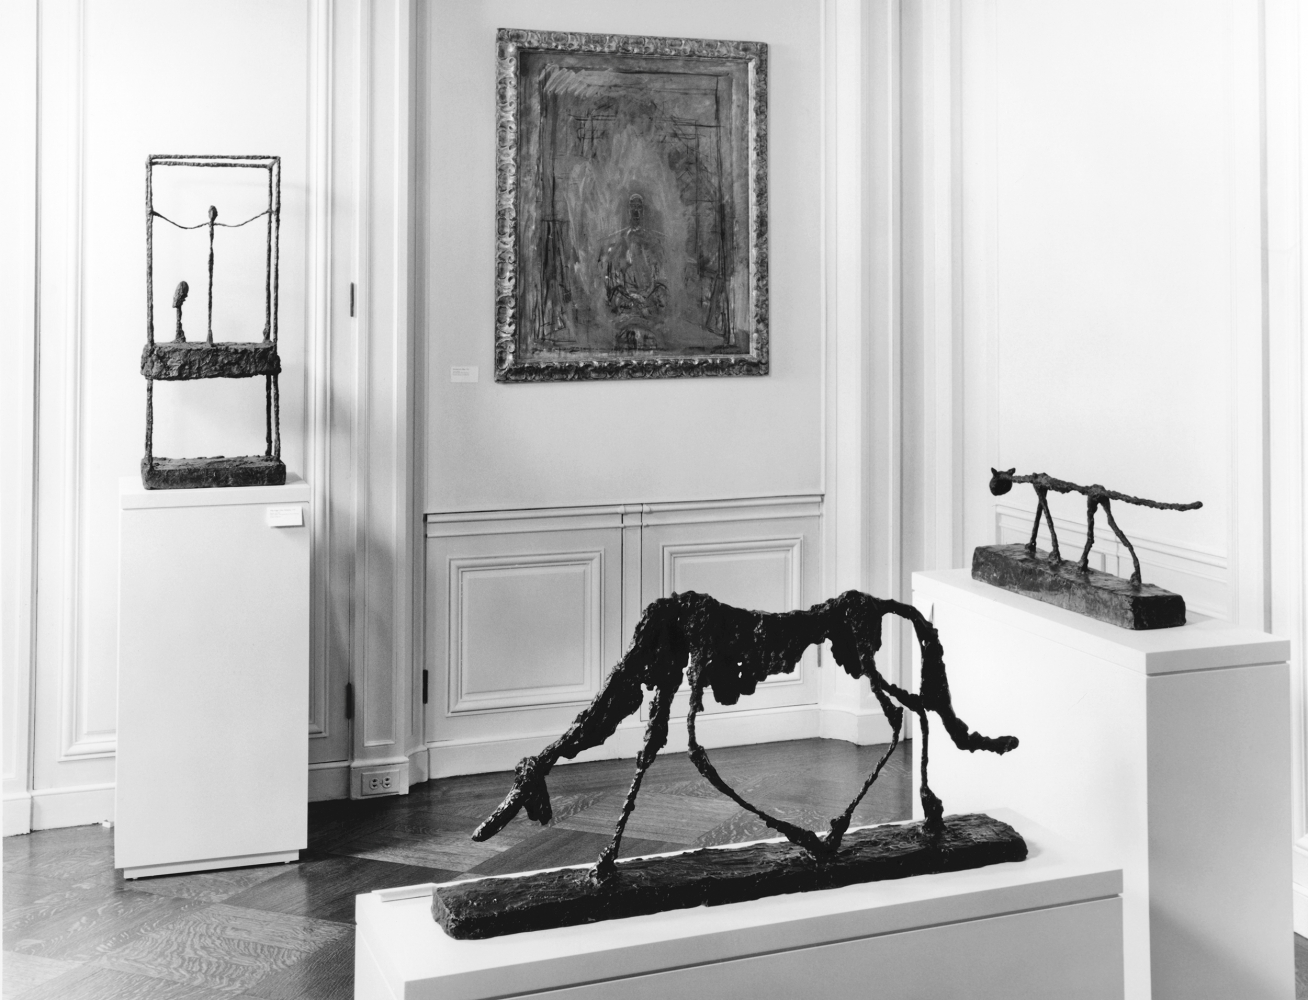 Installation view of&nbsp;Alberto Giacometti&nbsp;exhibition, fall 1994. Art&nbsp;&copy; Alberto Giacometti Estate / Licensed by VAGA and ARS, New York, NY.